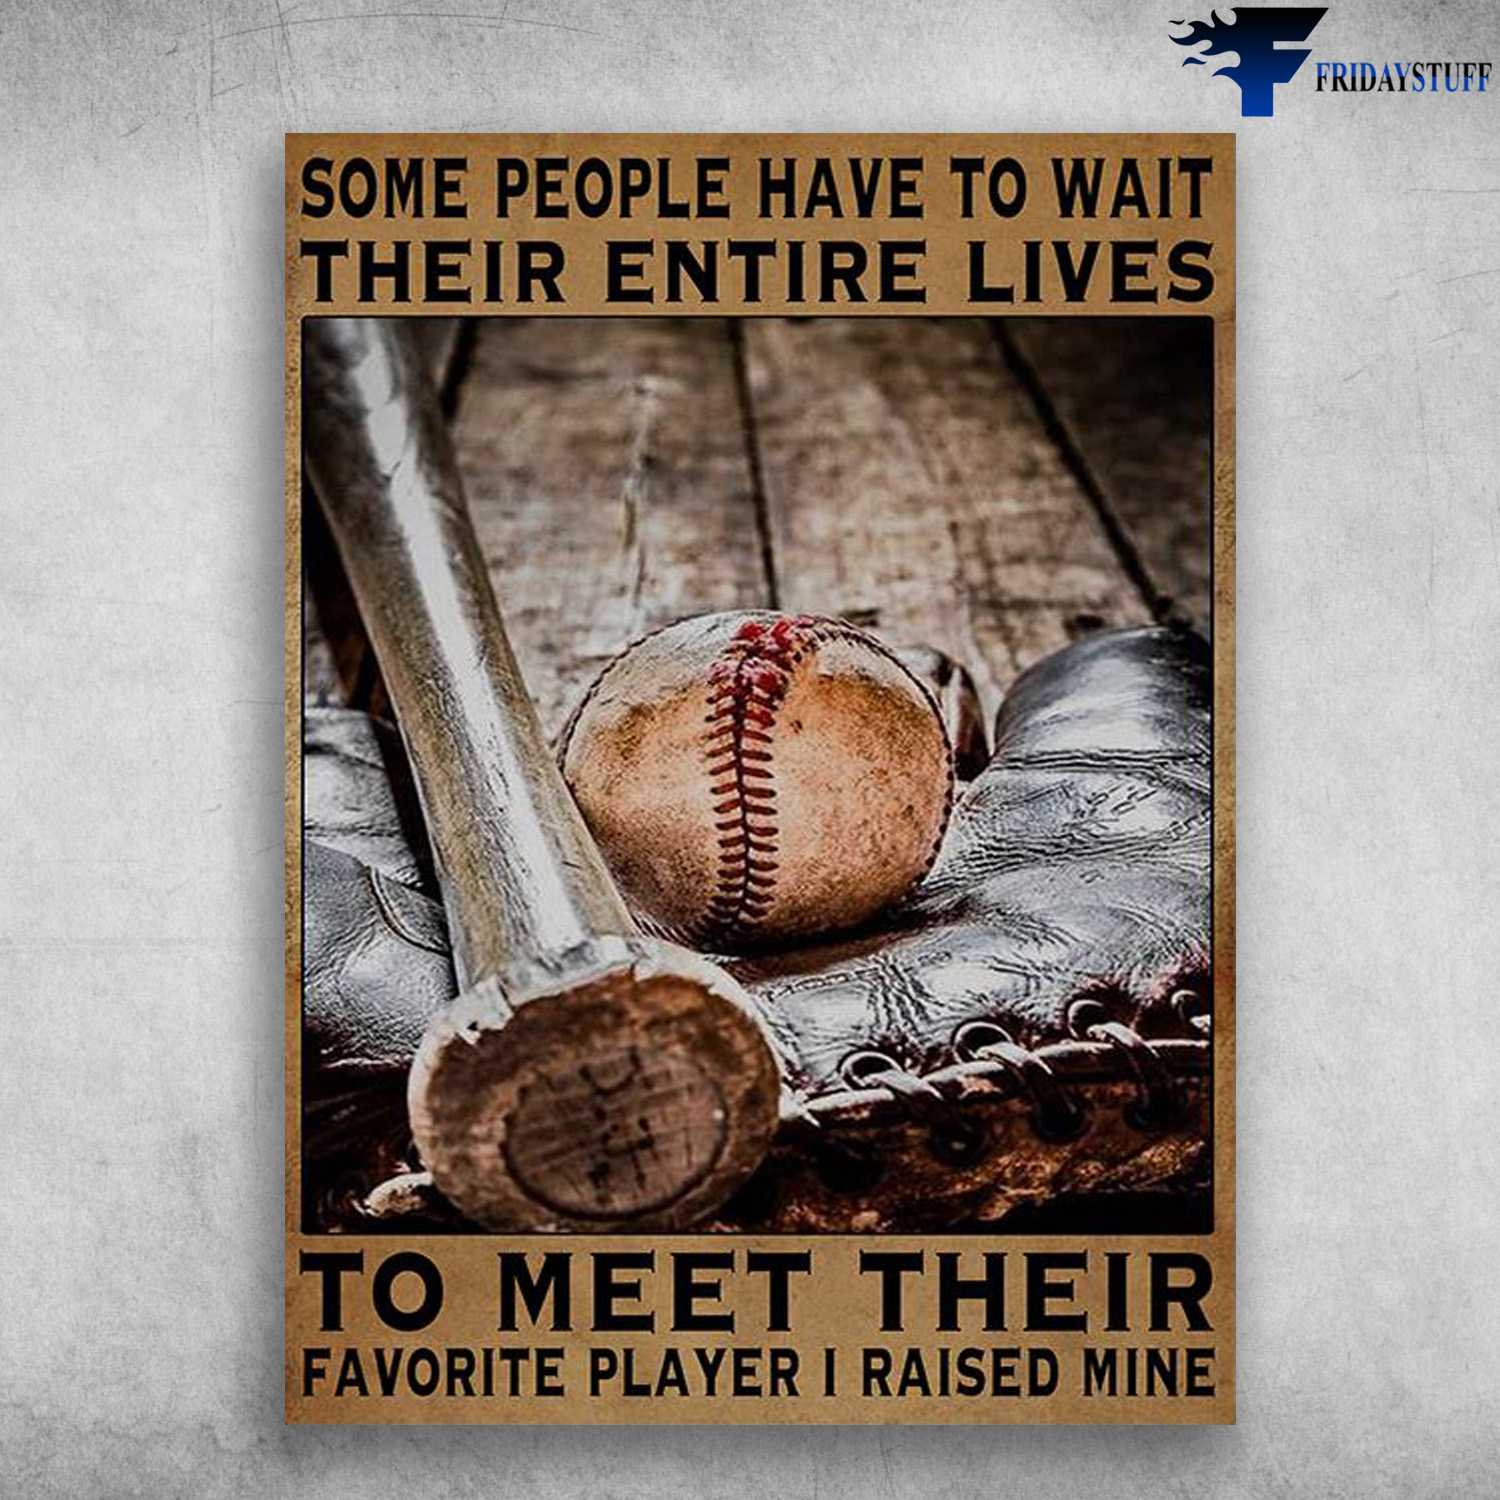 Baseball Lover, Baseball Poster - Some People Have To Wait Their Entire Lives, To Meet Their Favorite Player, I Raised Mine